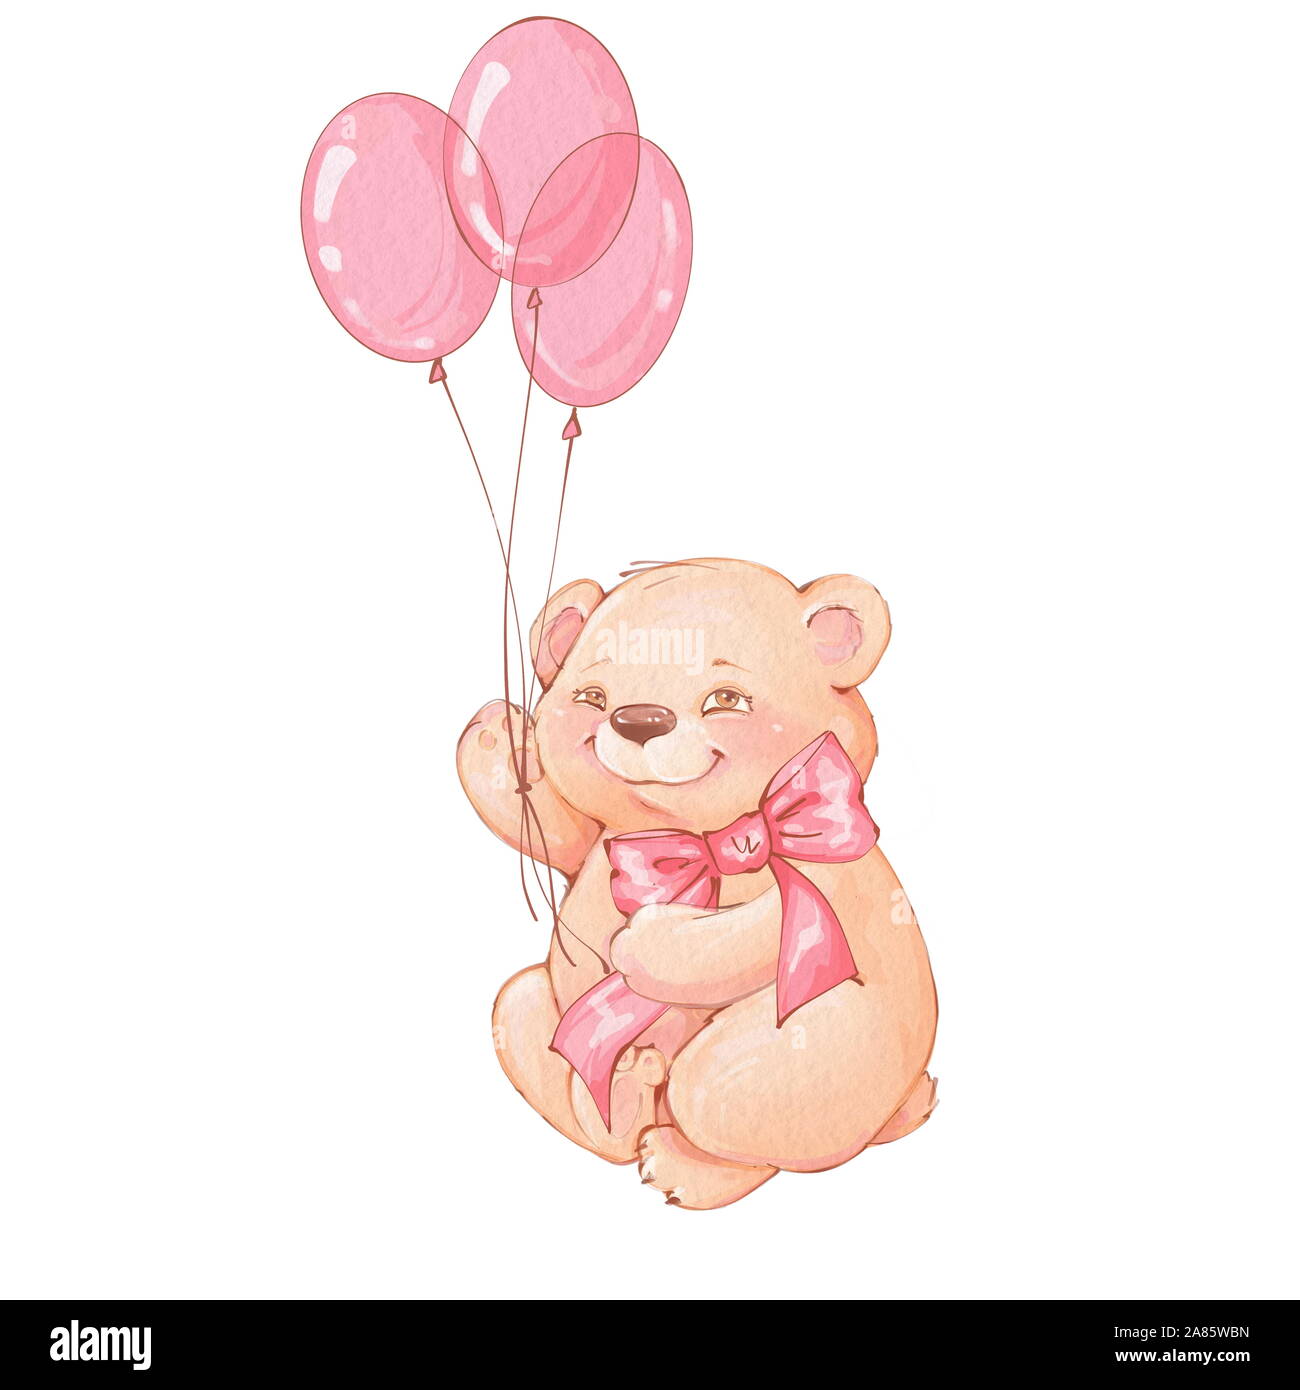 Cute Teddy Bear with pink balloons Stock Photo